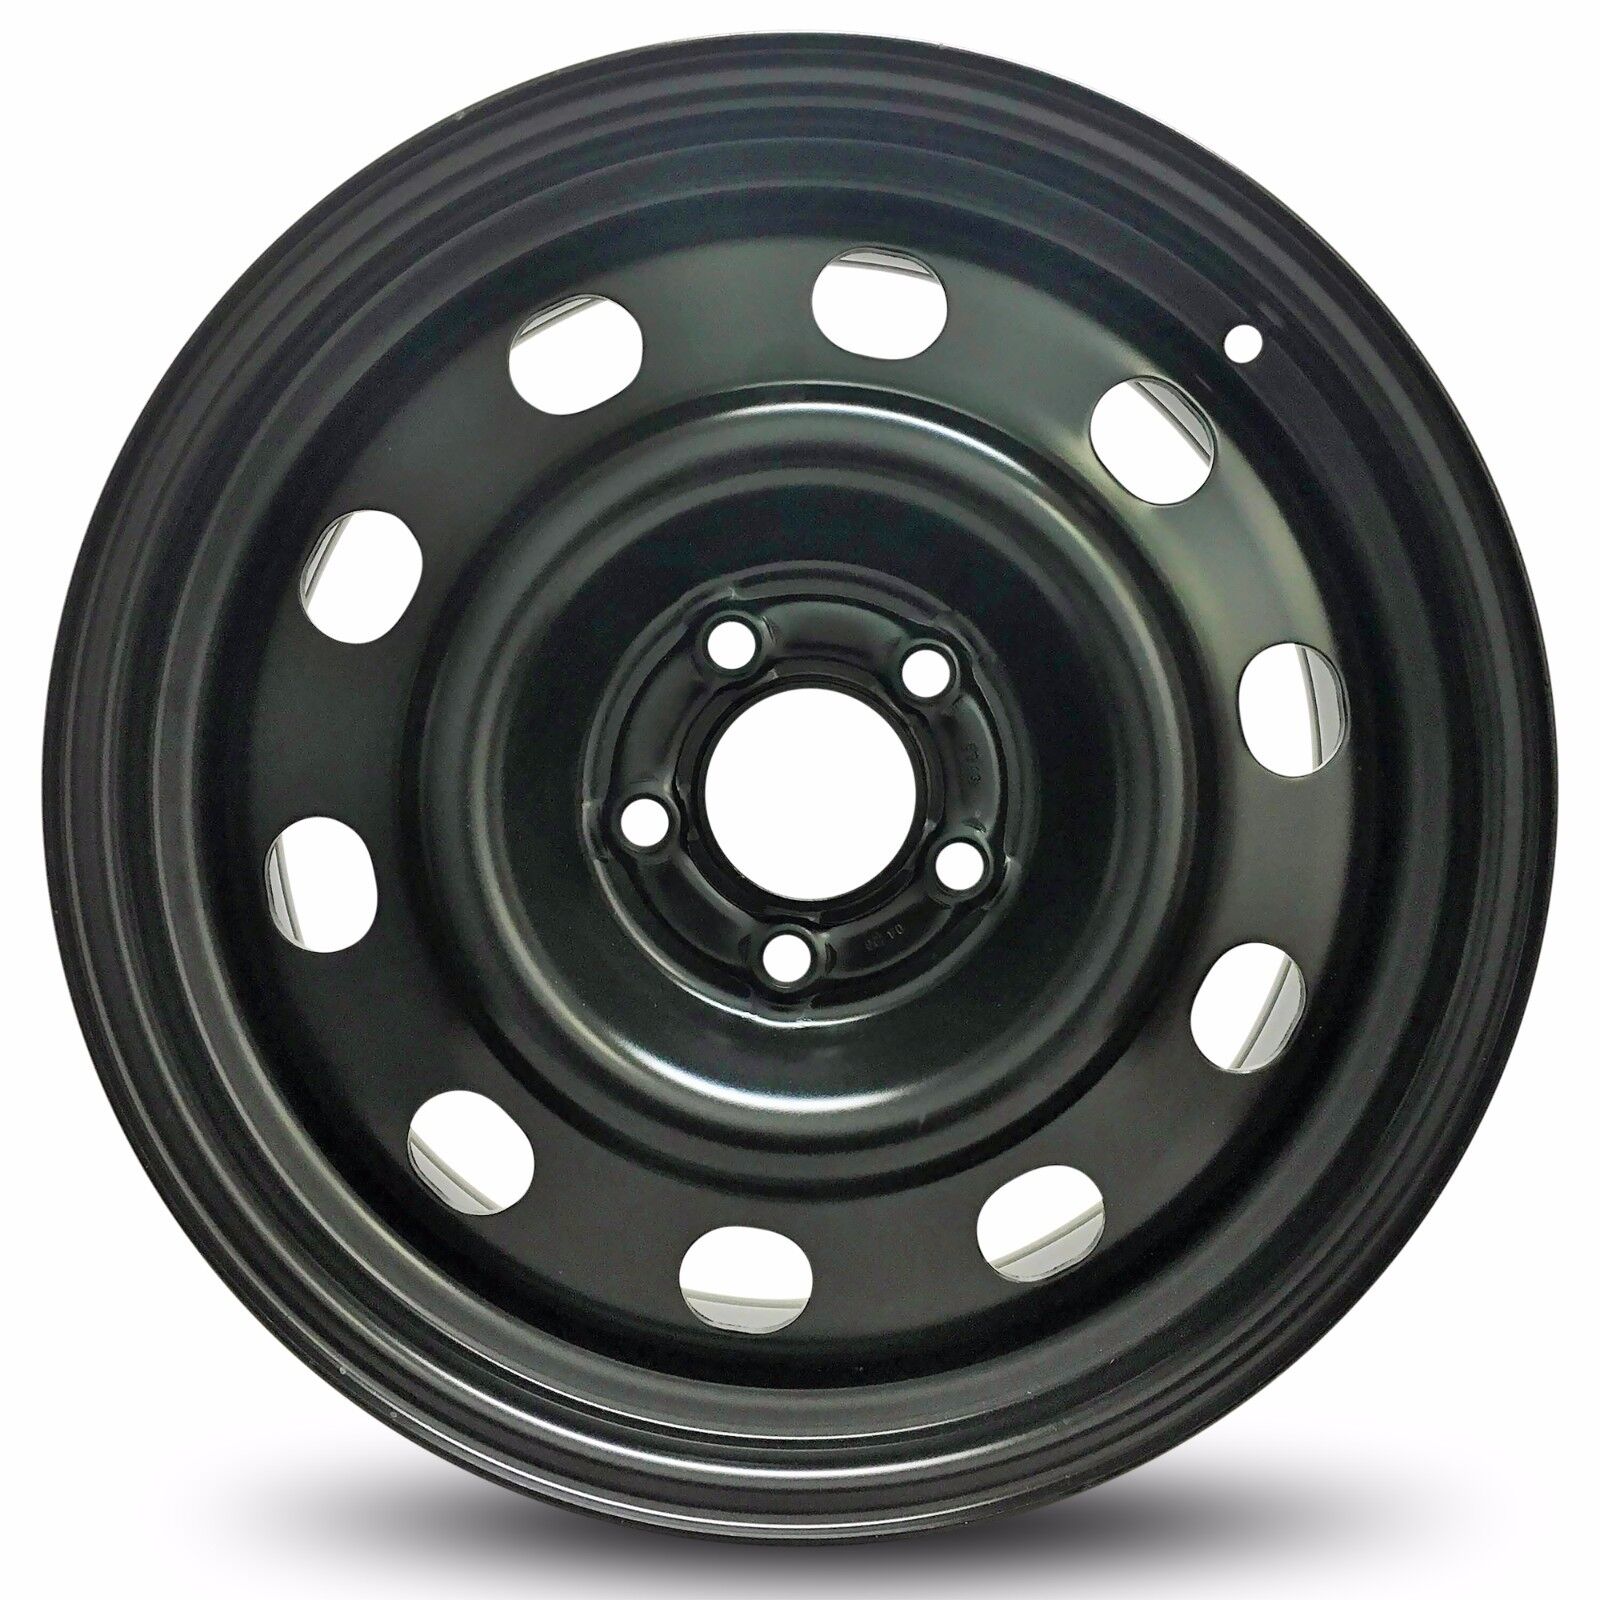 New Wheel For 2006-2011 Ford Crown Victoria 17 Inch Black Steel Rim